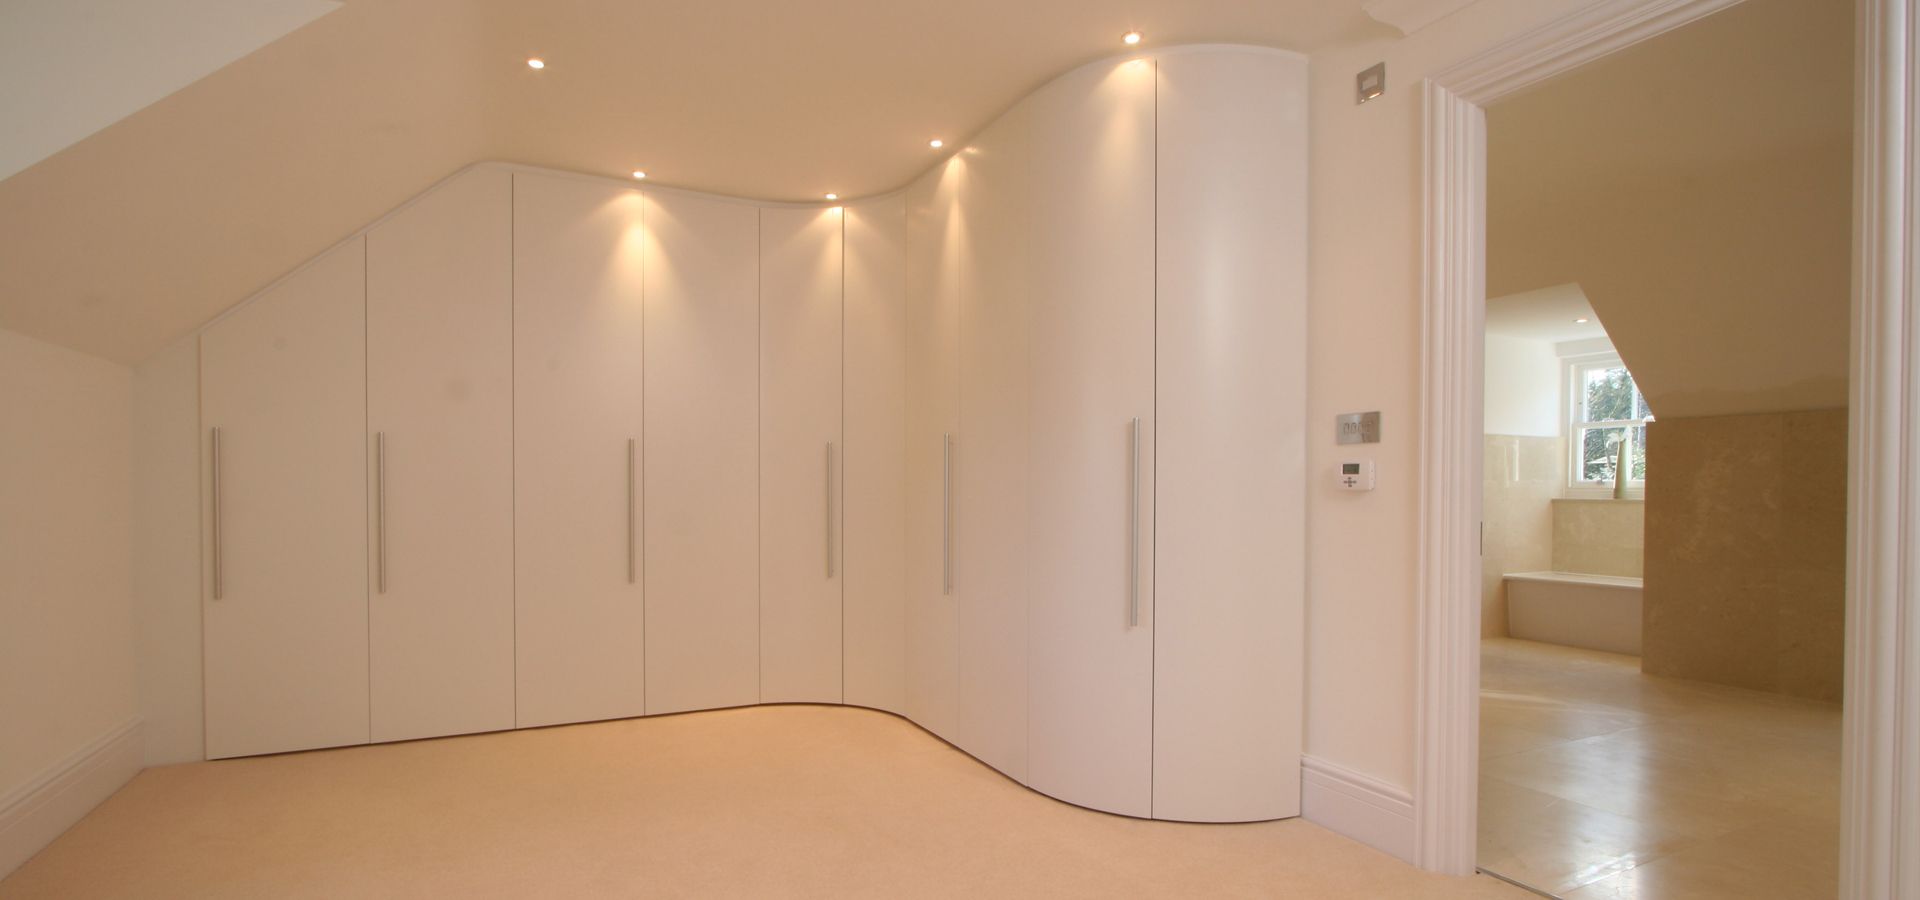 Alfa Curve – Fitted Bedroom Furniture | Wardrobes Uk | Lawrence Walsh  Furniture Within Curved Wardrobes Doors (View 12 of 20)